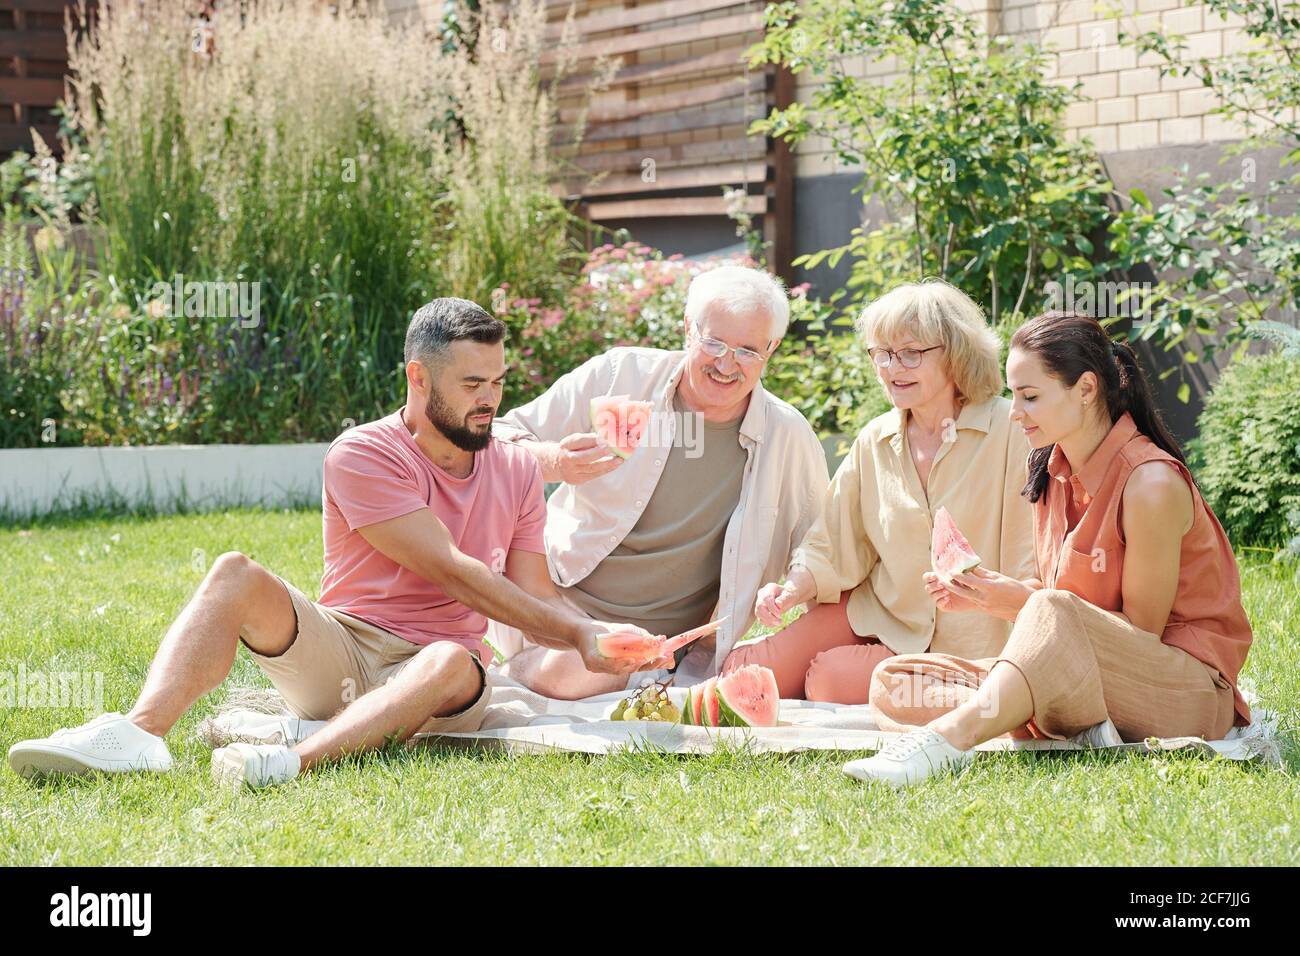 Family shot of senior man and woman having picnic with their young adult children on lawn Stock Photo